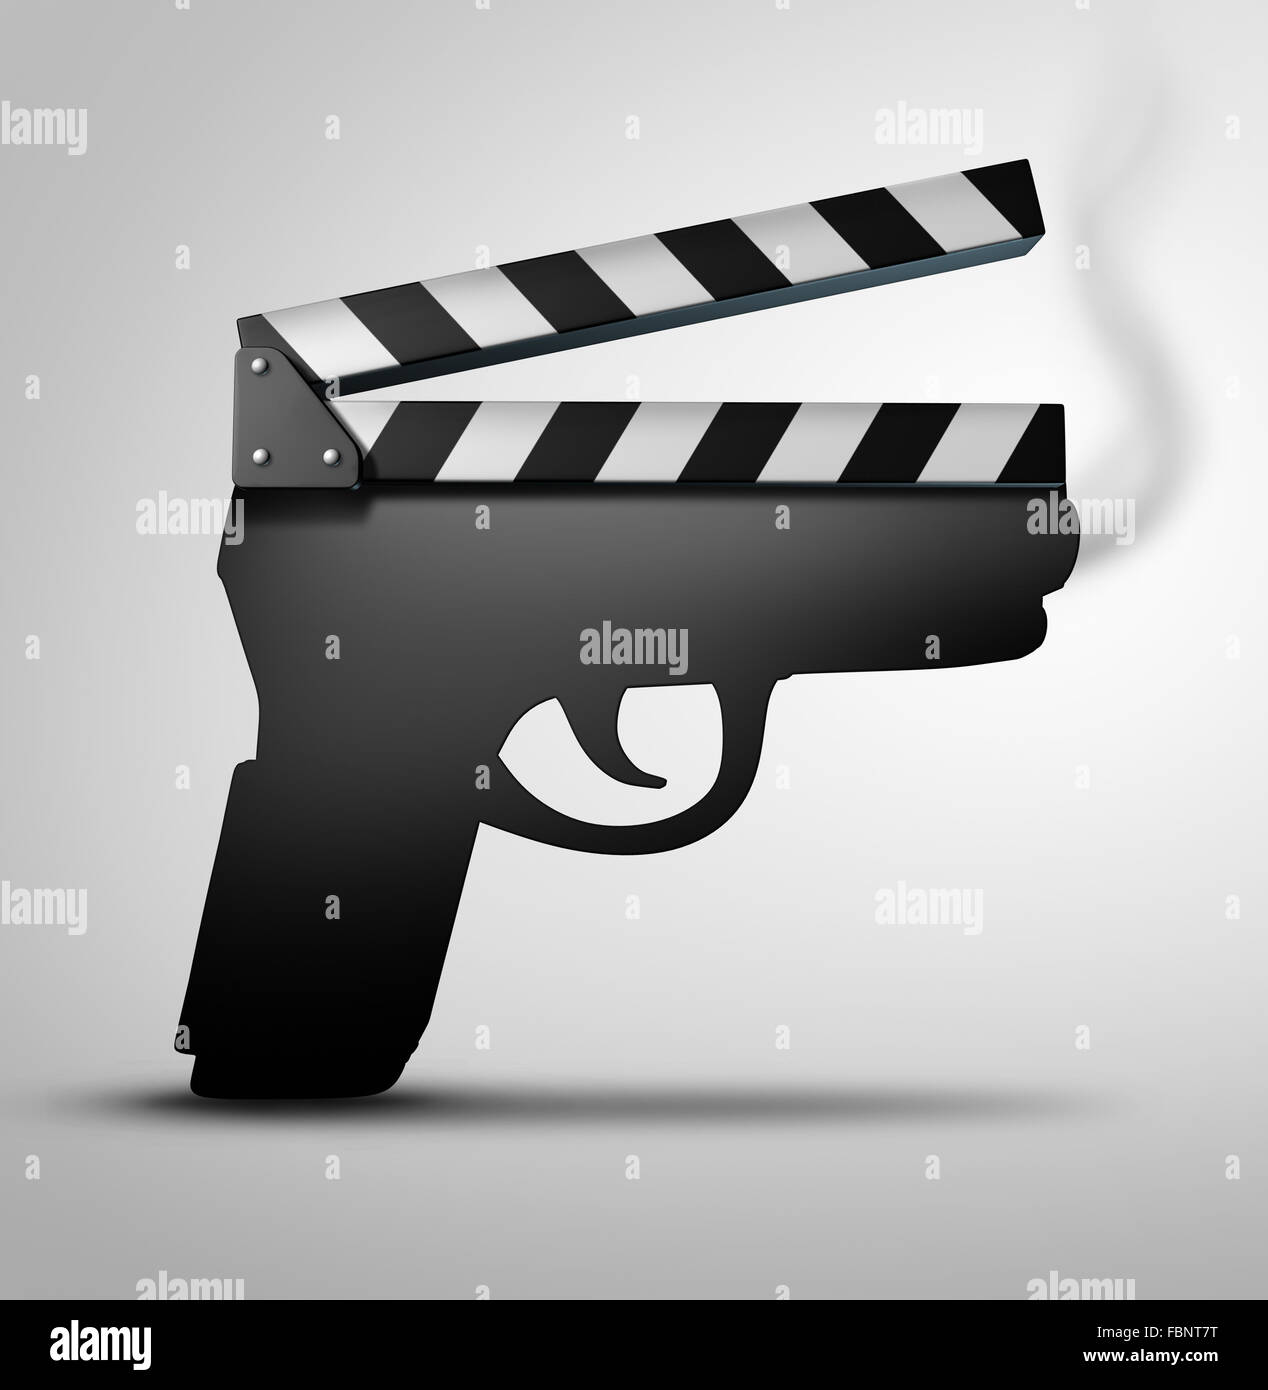 Movie violence concept or crime flick concept as a clapperboard or movie slate board shaped as a gun as a symbol for guns in television internet or movies. Stock Photo